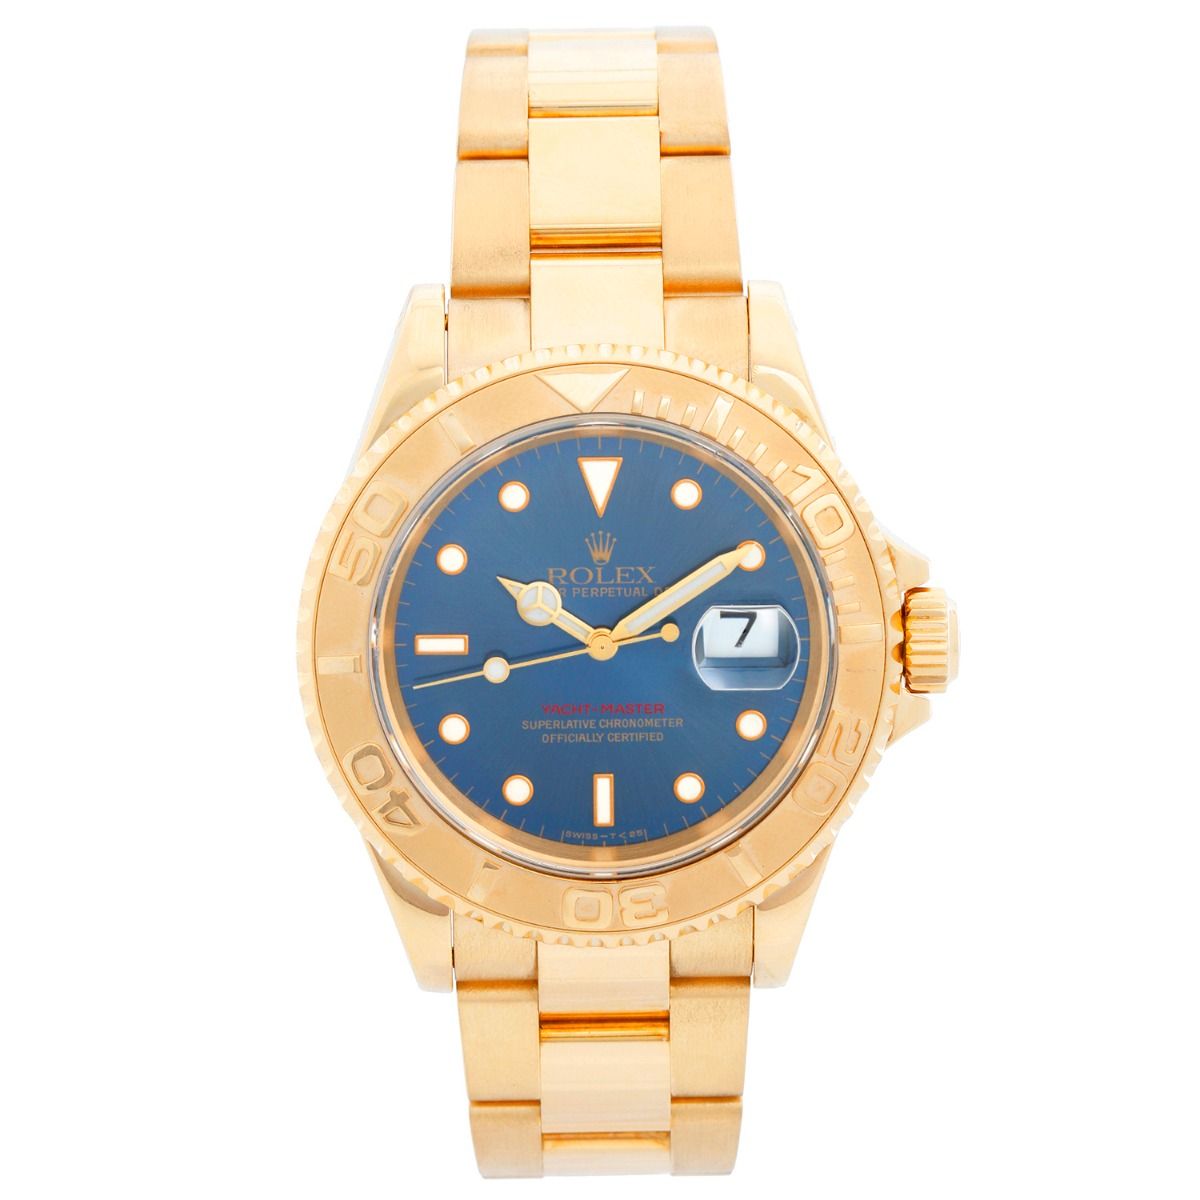 Rolex Yacht-Master 40mm Stainless Steel/Yellow Gold - Blue for $10,642  for sale from a Trusted Seller on Chrono24 in 2023